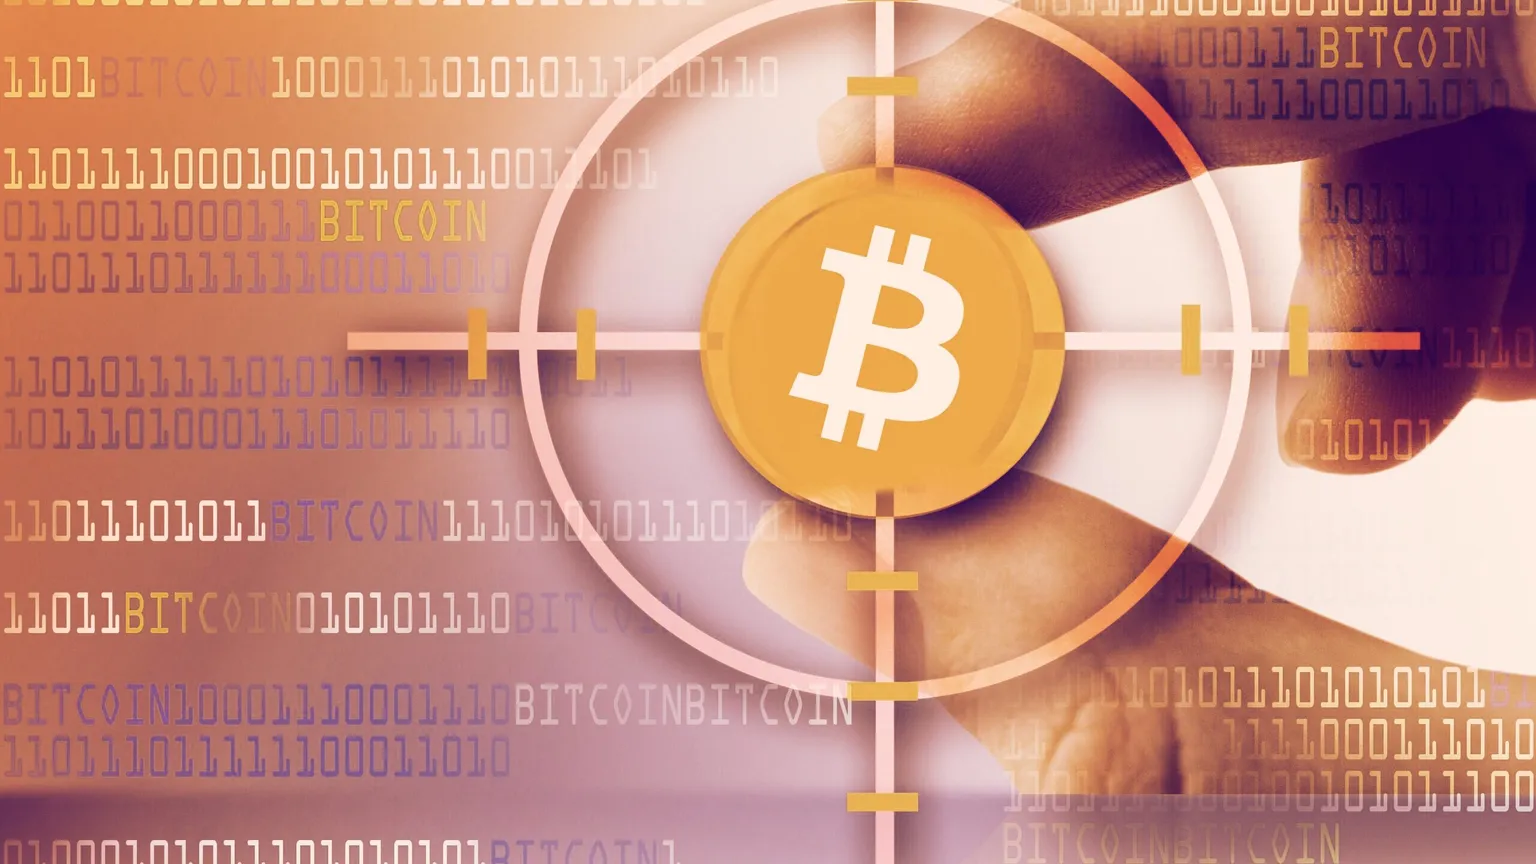 The Bitcoin logo consists of a tilted B against an orange background. Image: Shuttertstock.